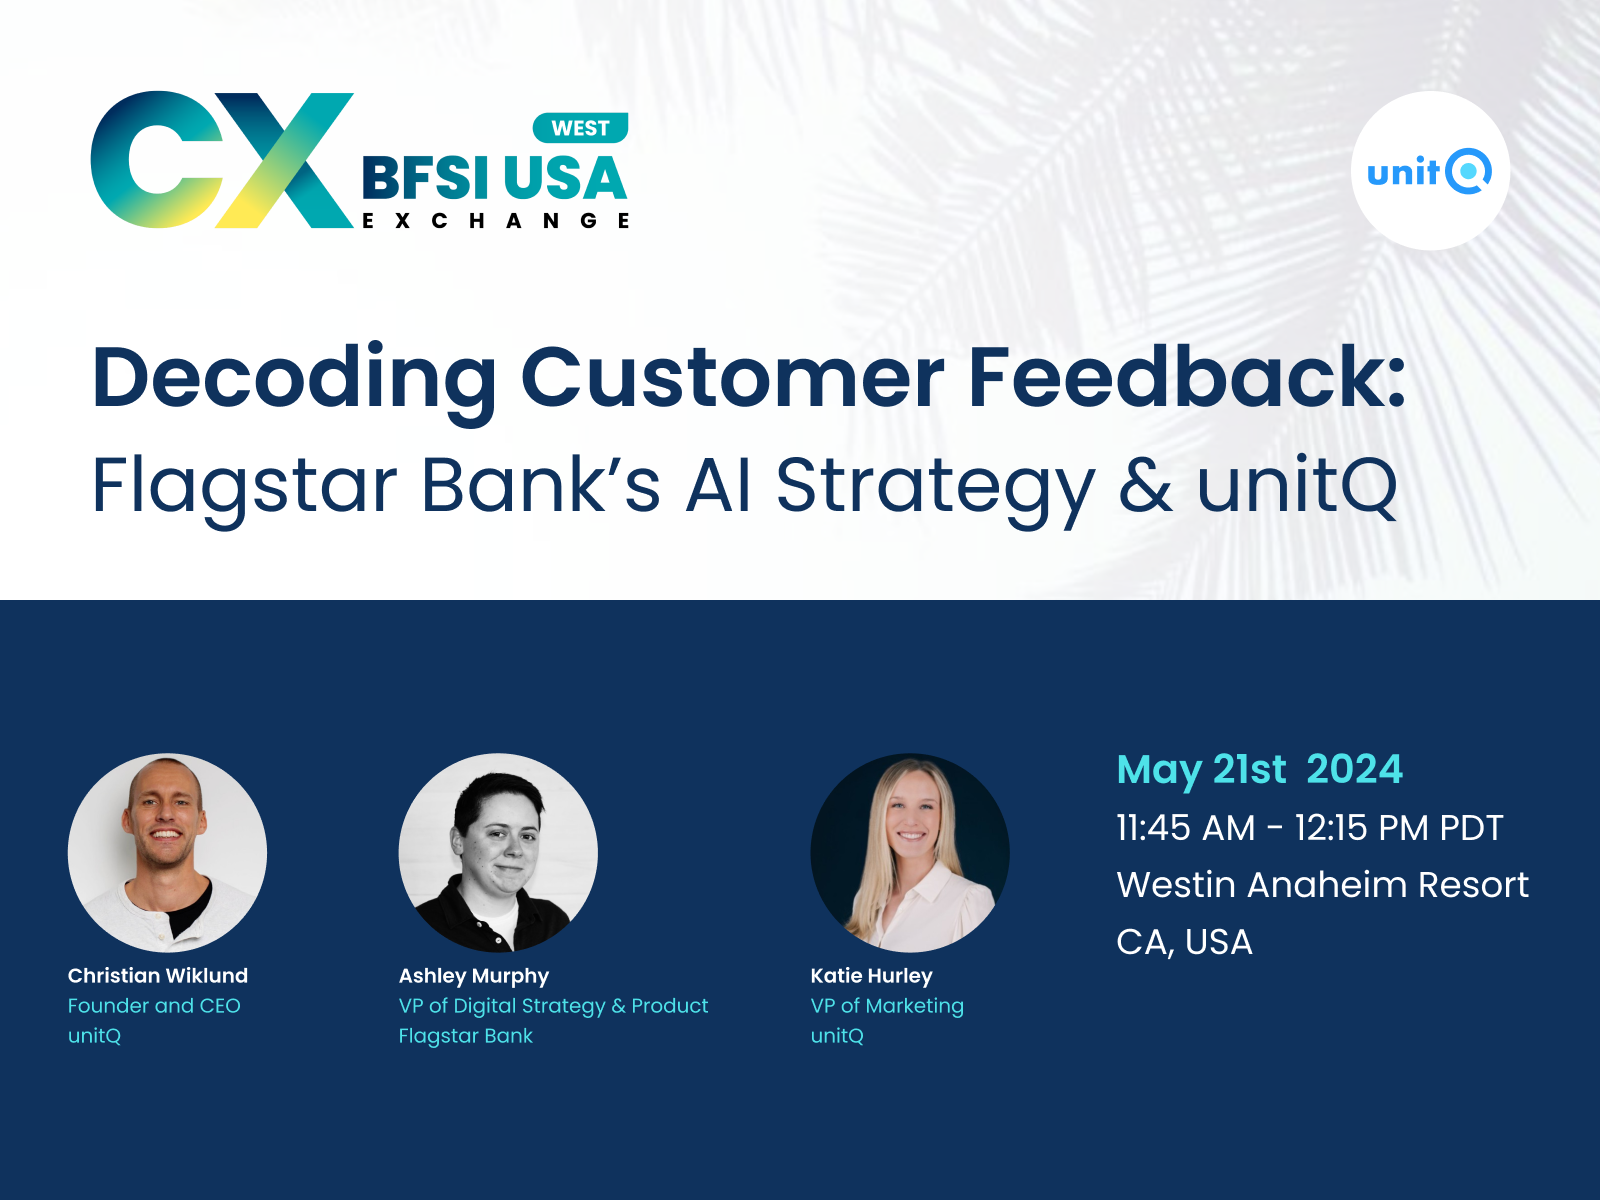 Panel discussion: How Flagstar Bank utilizes unitQ to guide CX, digital strategy